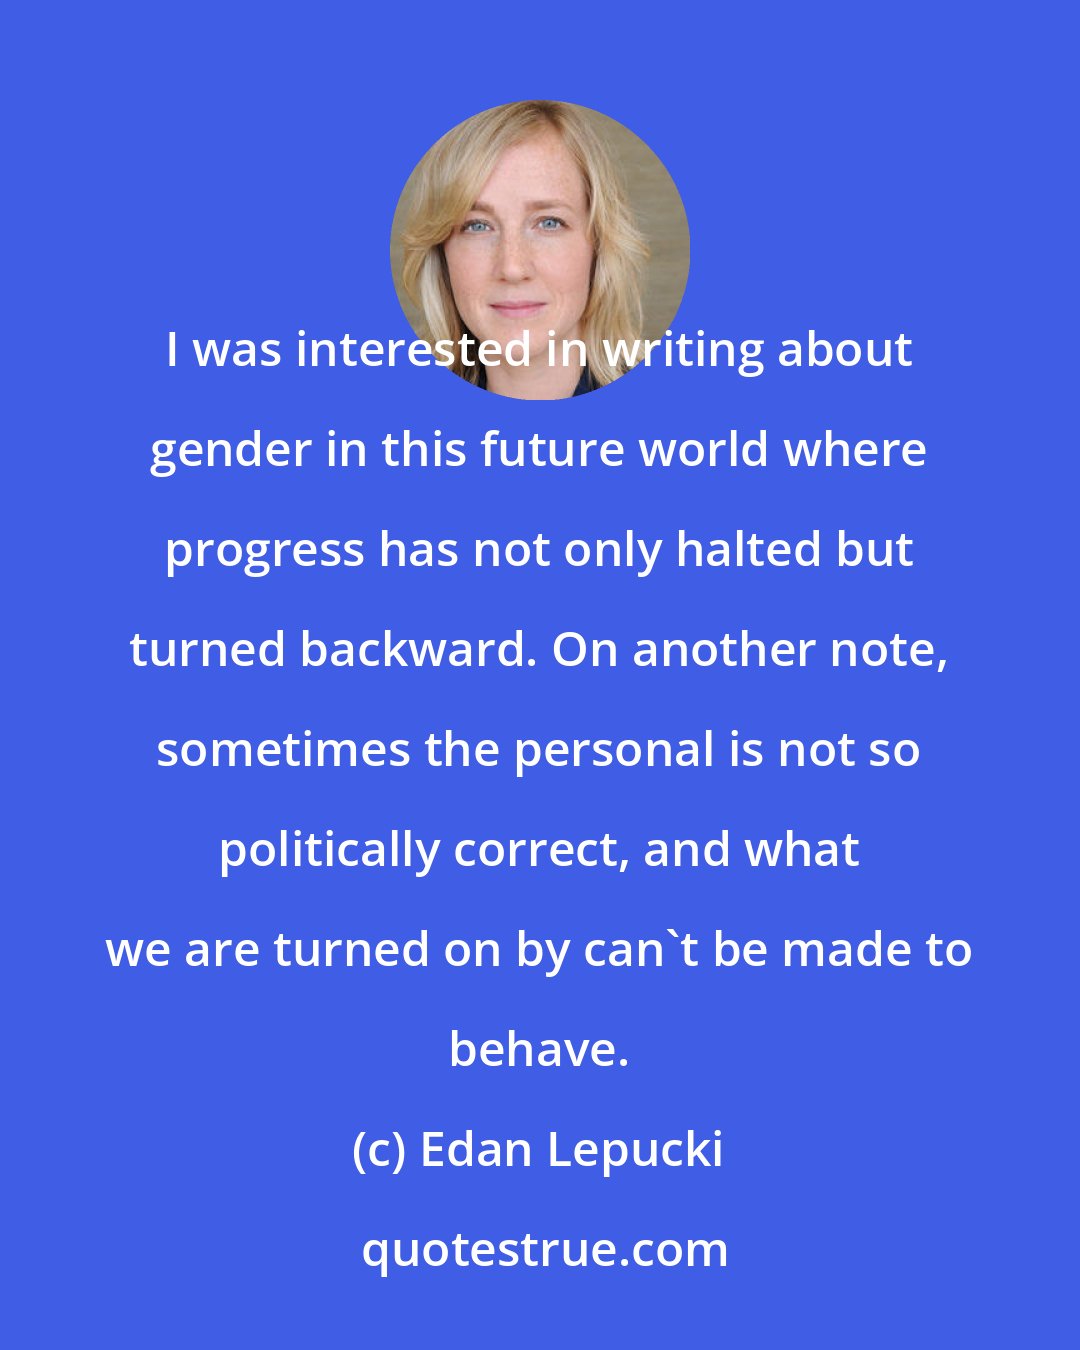 Edan Lepucki: I was interested in writing about gender in this future world where progress has not only halted but turned backward. On another note, sometimes the personal is not so politically correct, and what we are turned on by can't be made to behave.